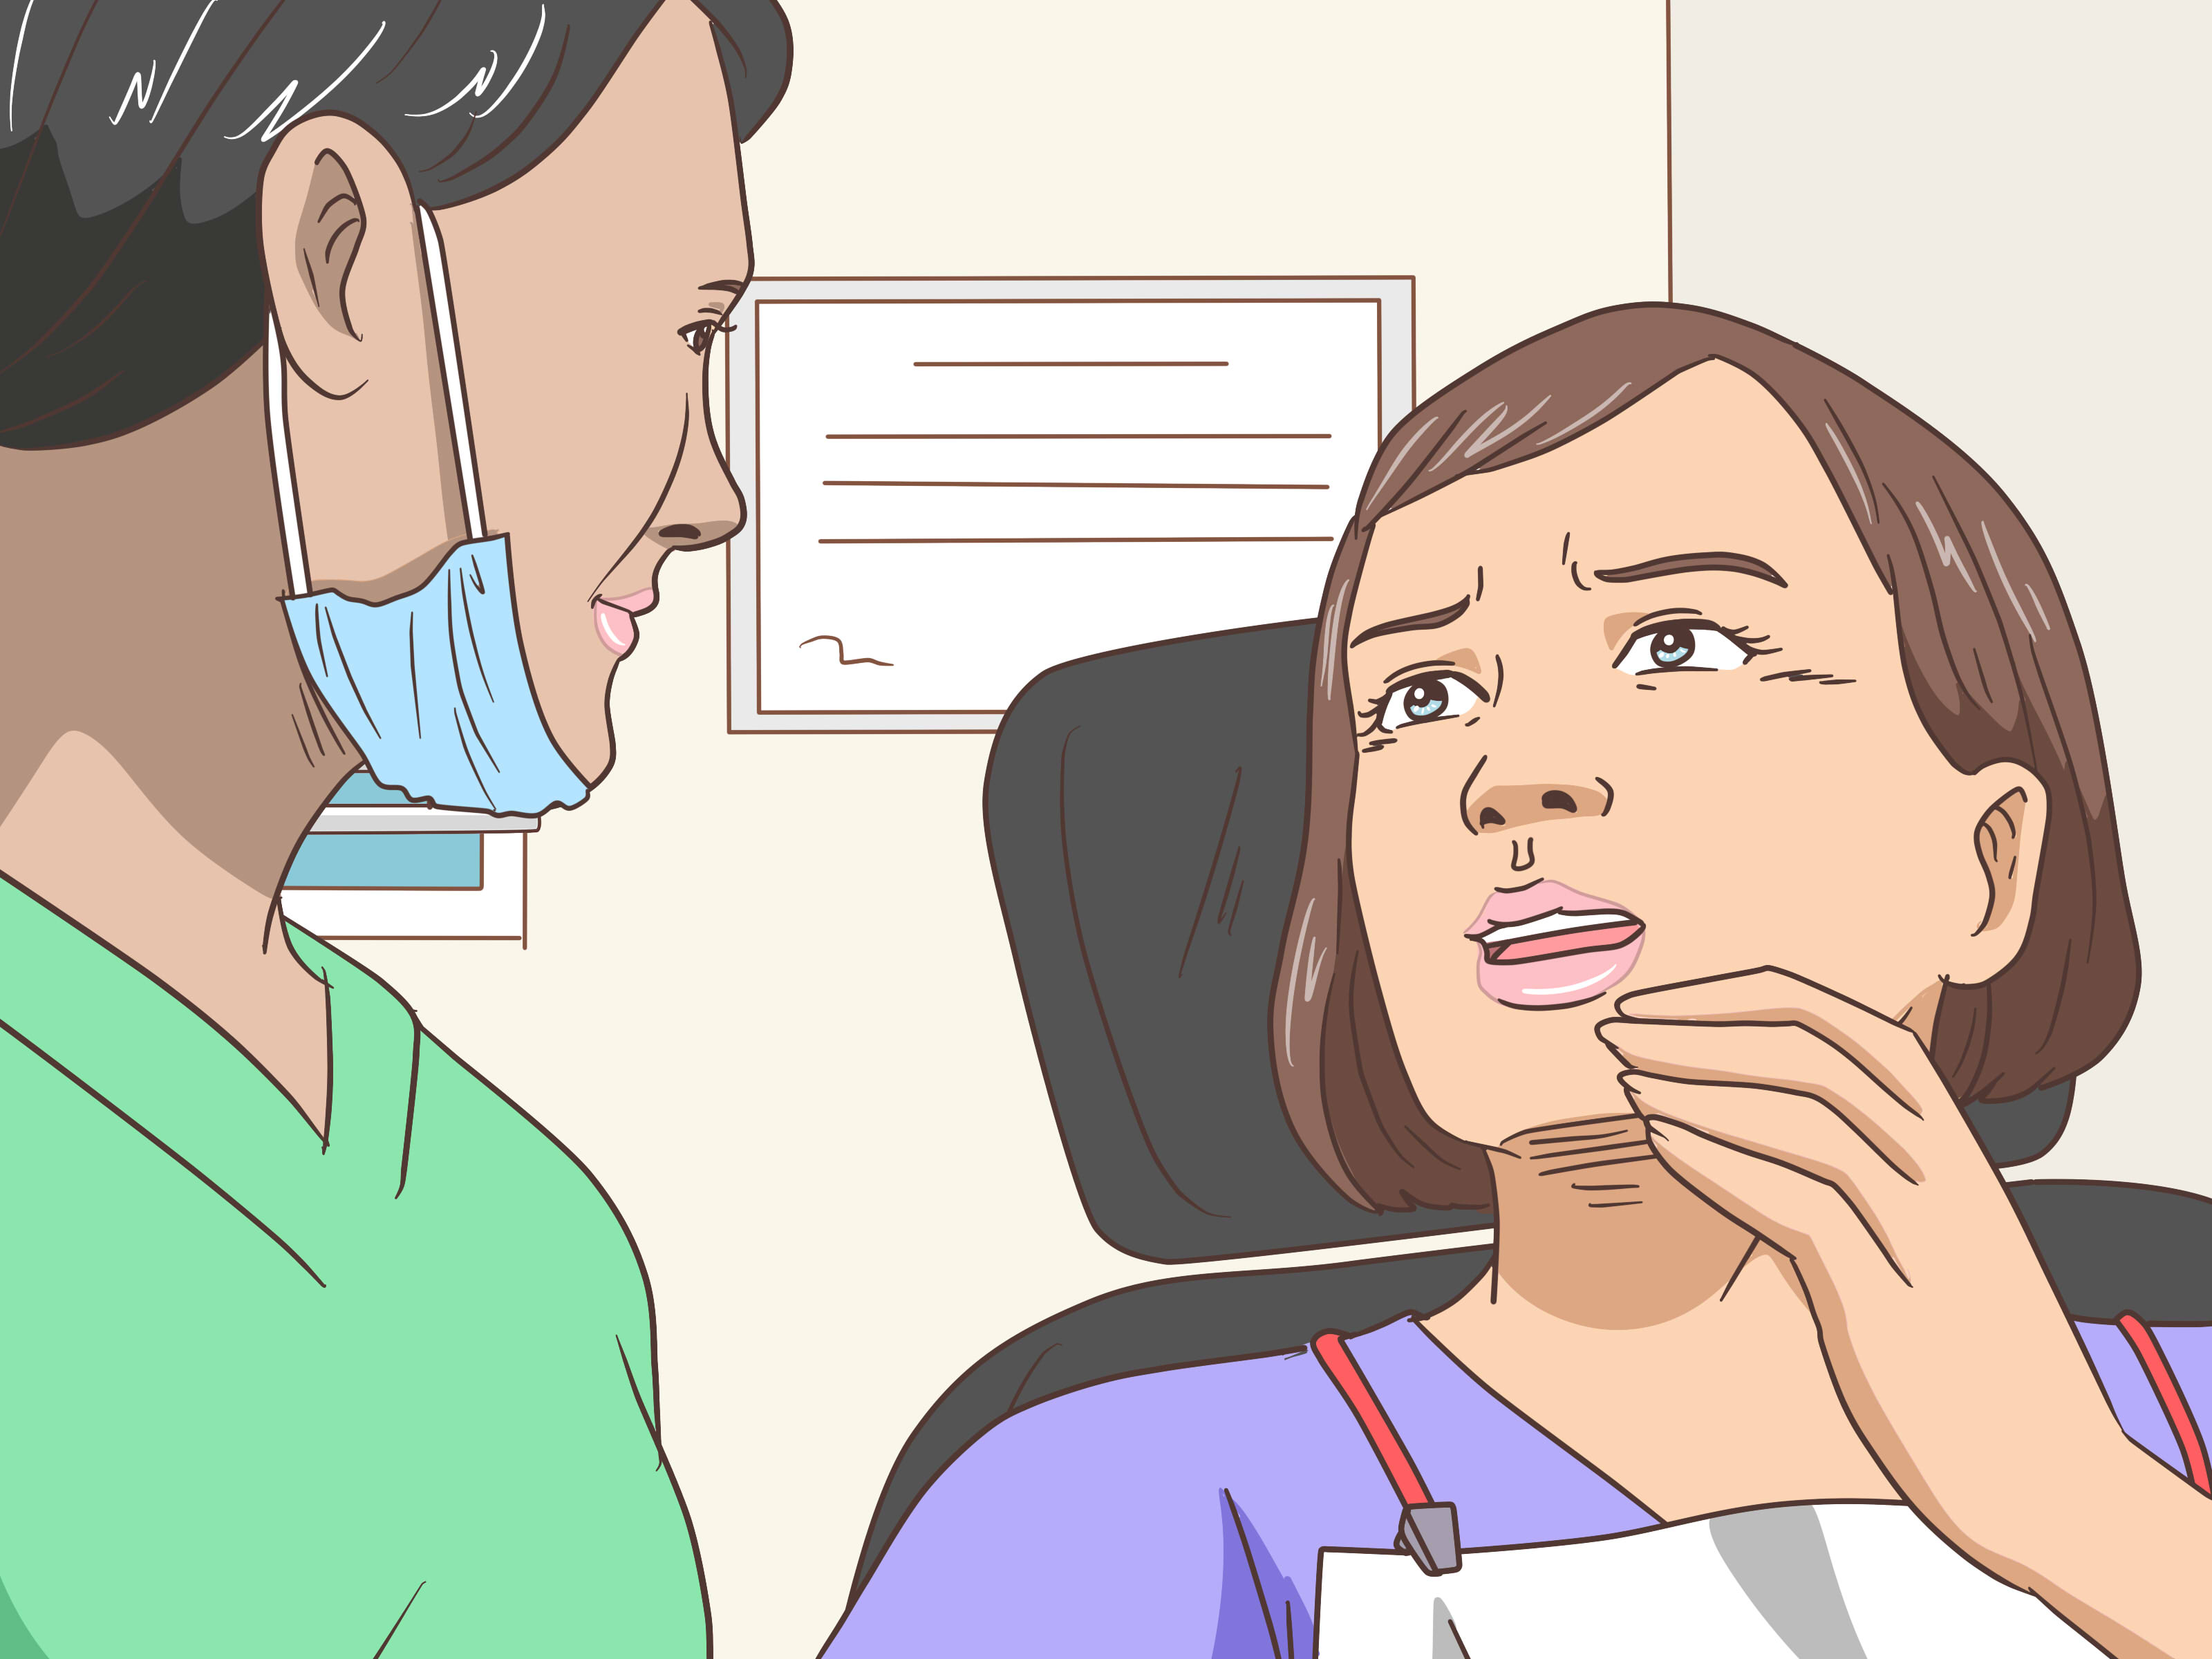 4 Ways to Tell if You Have Bad Breath - wikiHow